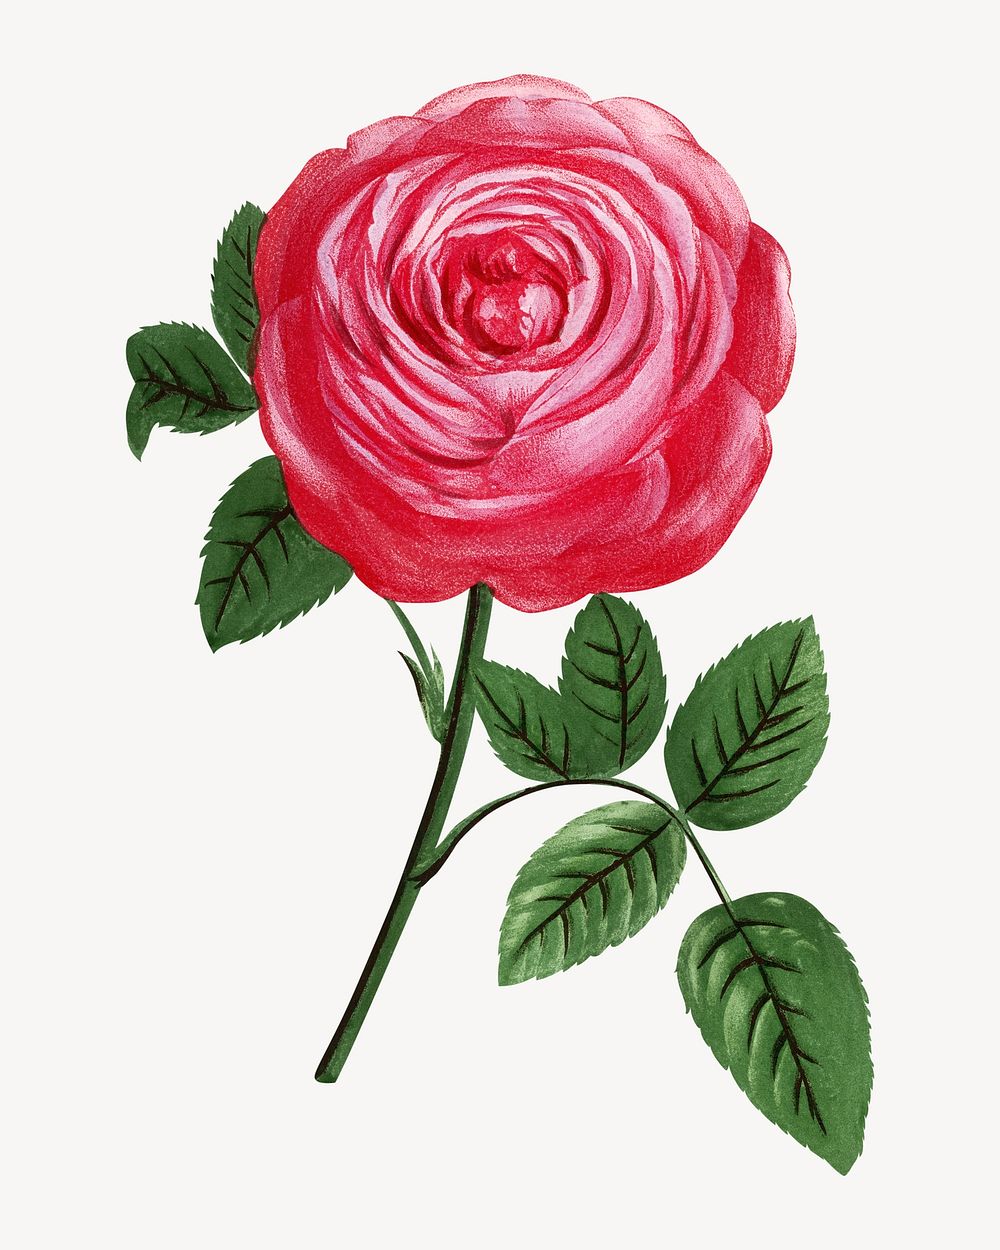 Bright pink rose, French flower vintage illustration by François-Frédéric Grobon. Remixed by rawpixel.